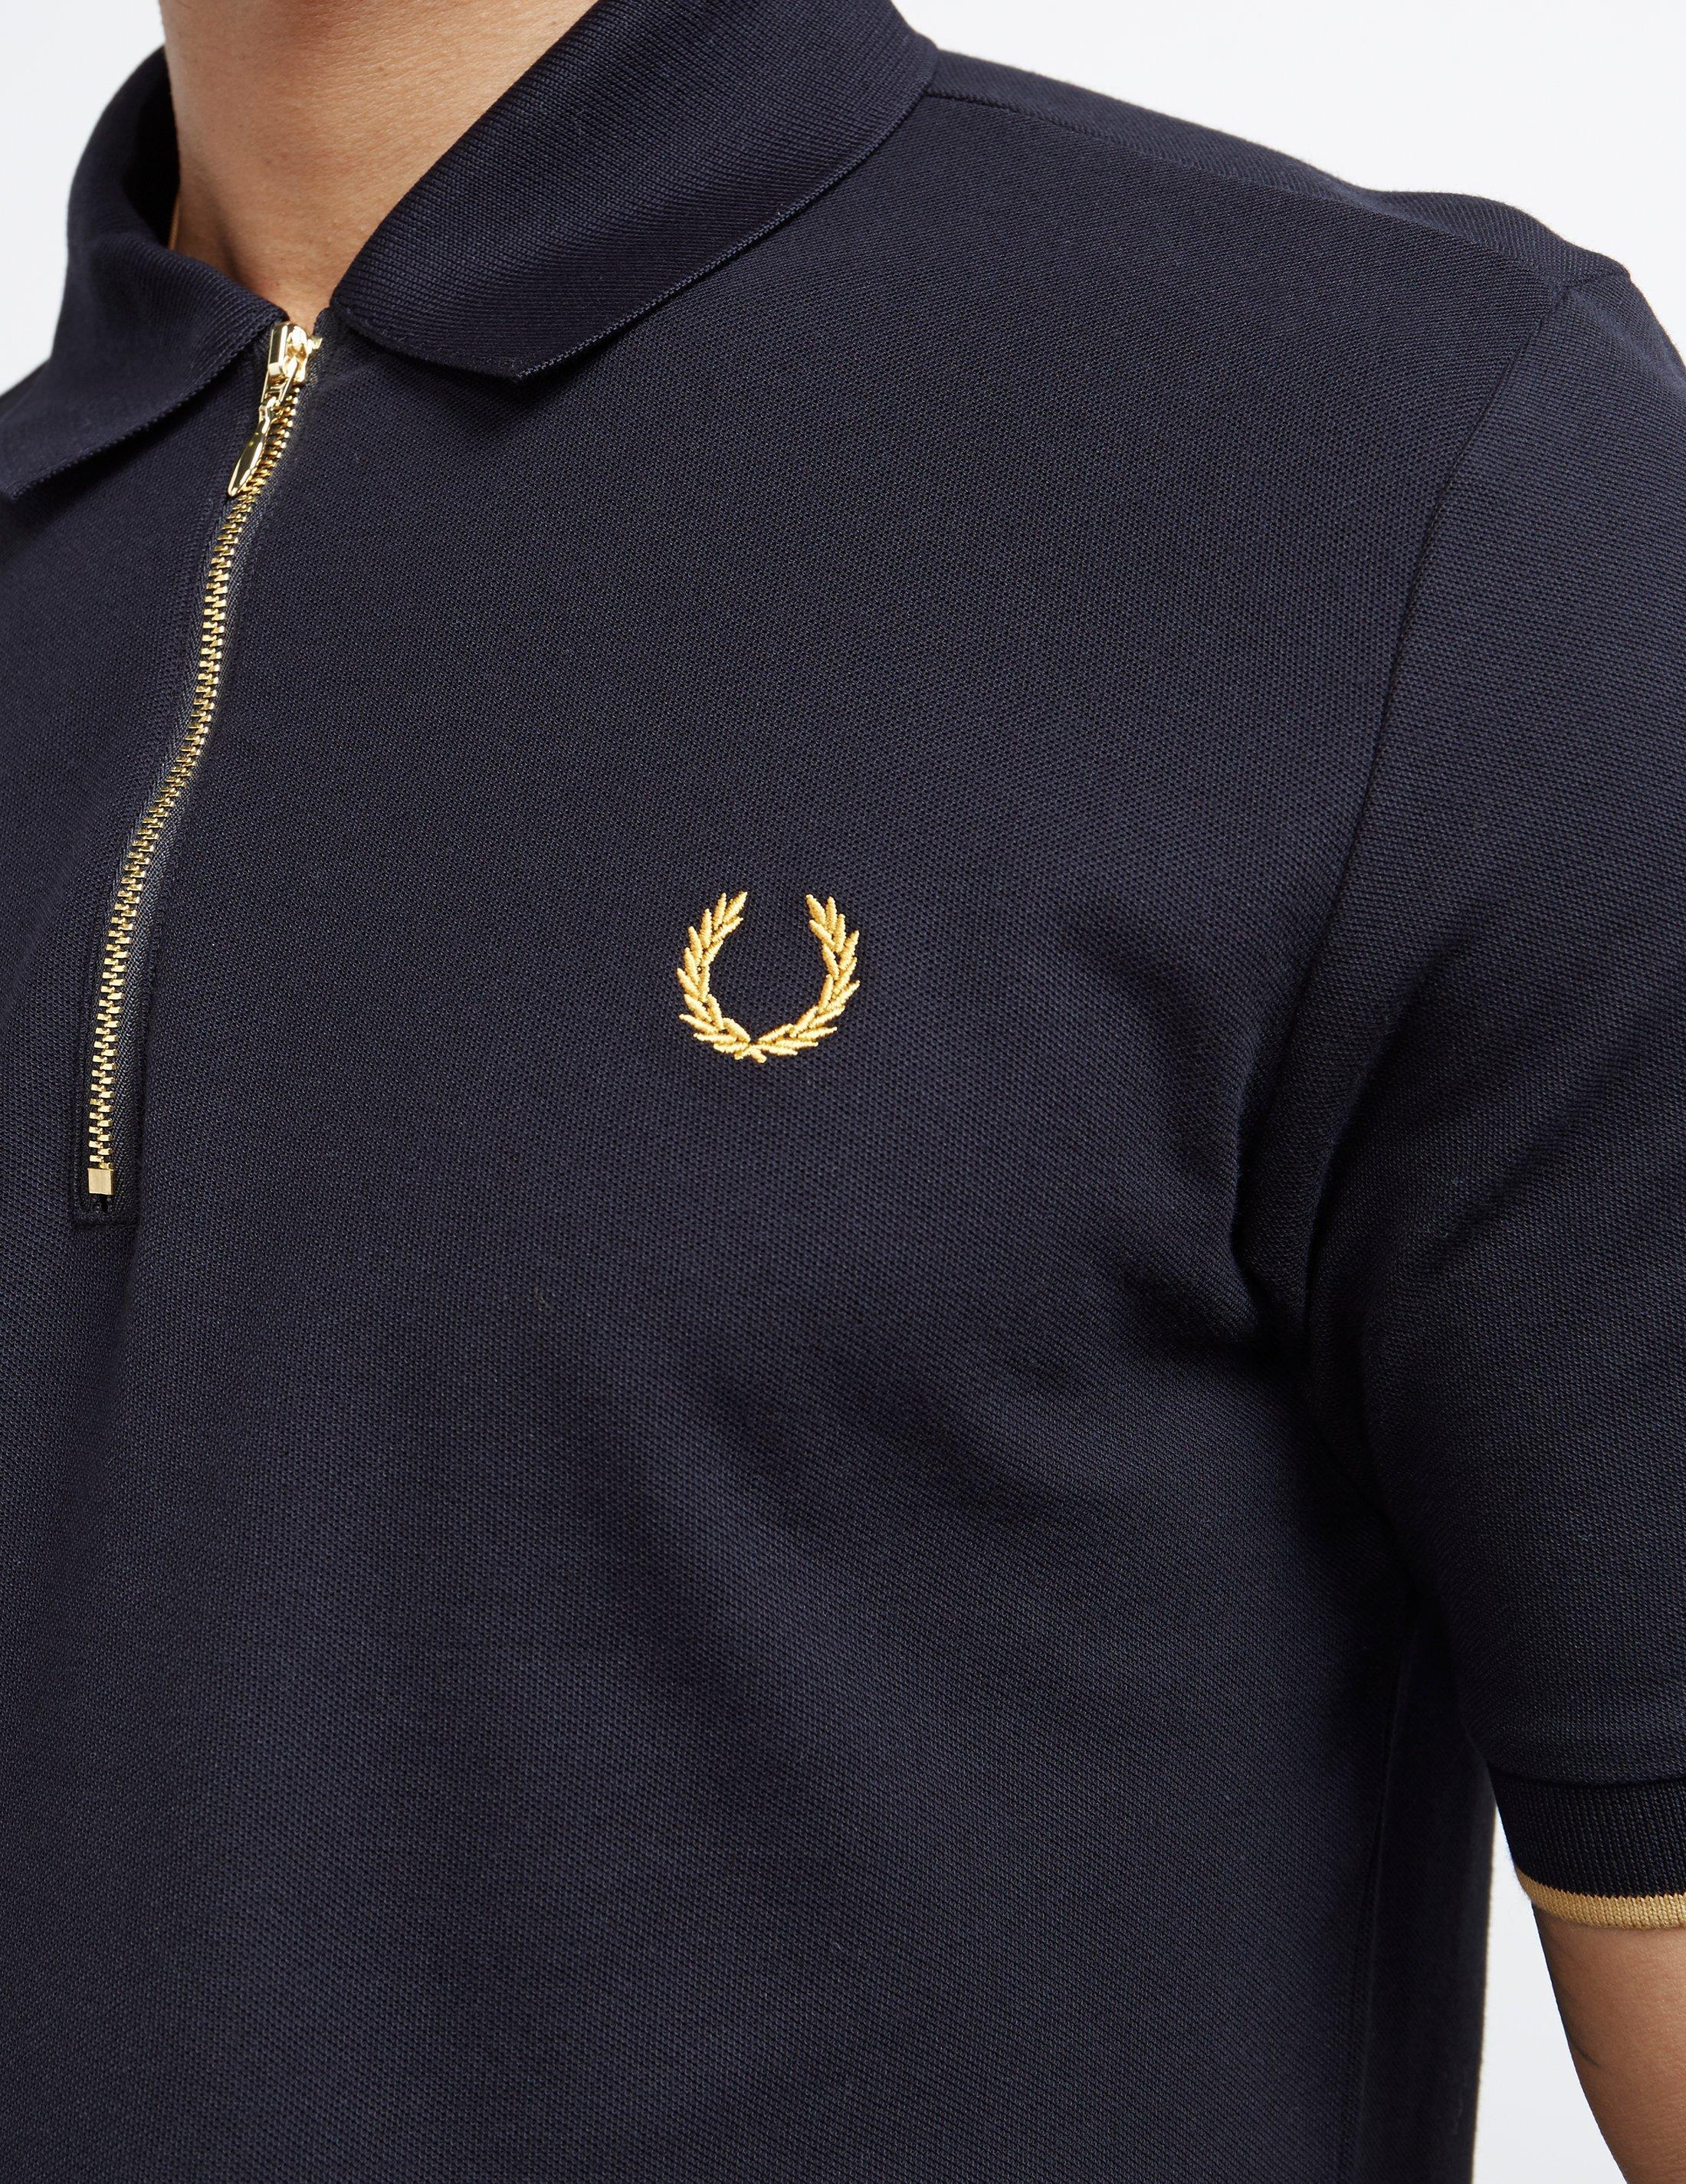 Buy black and gold fred perry polo shirts cheap online